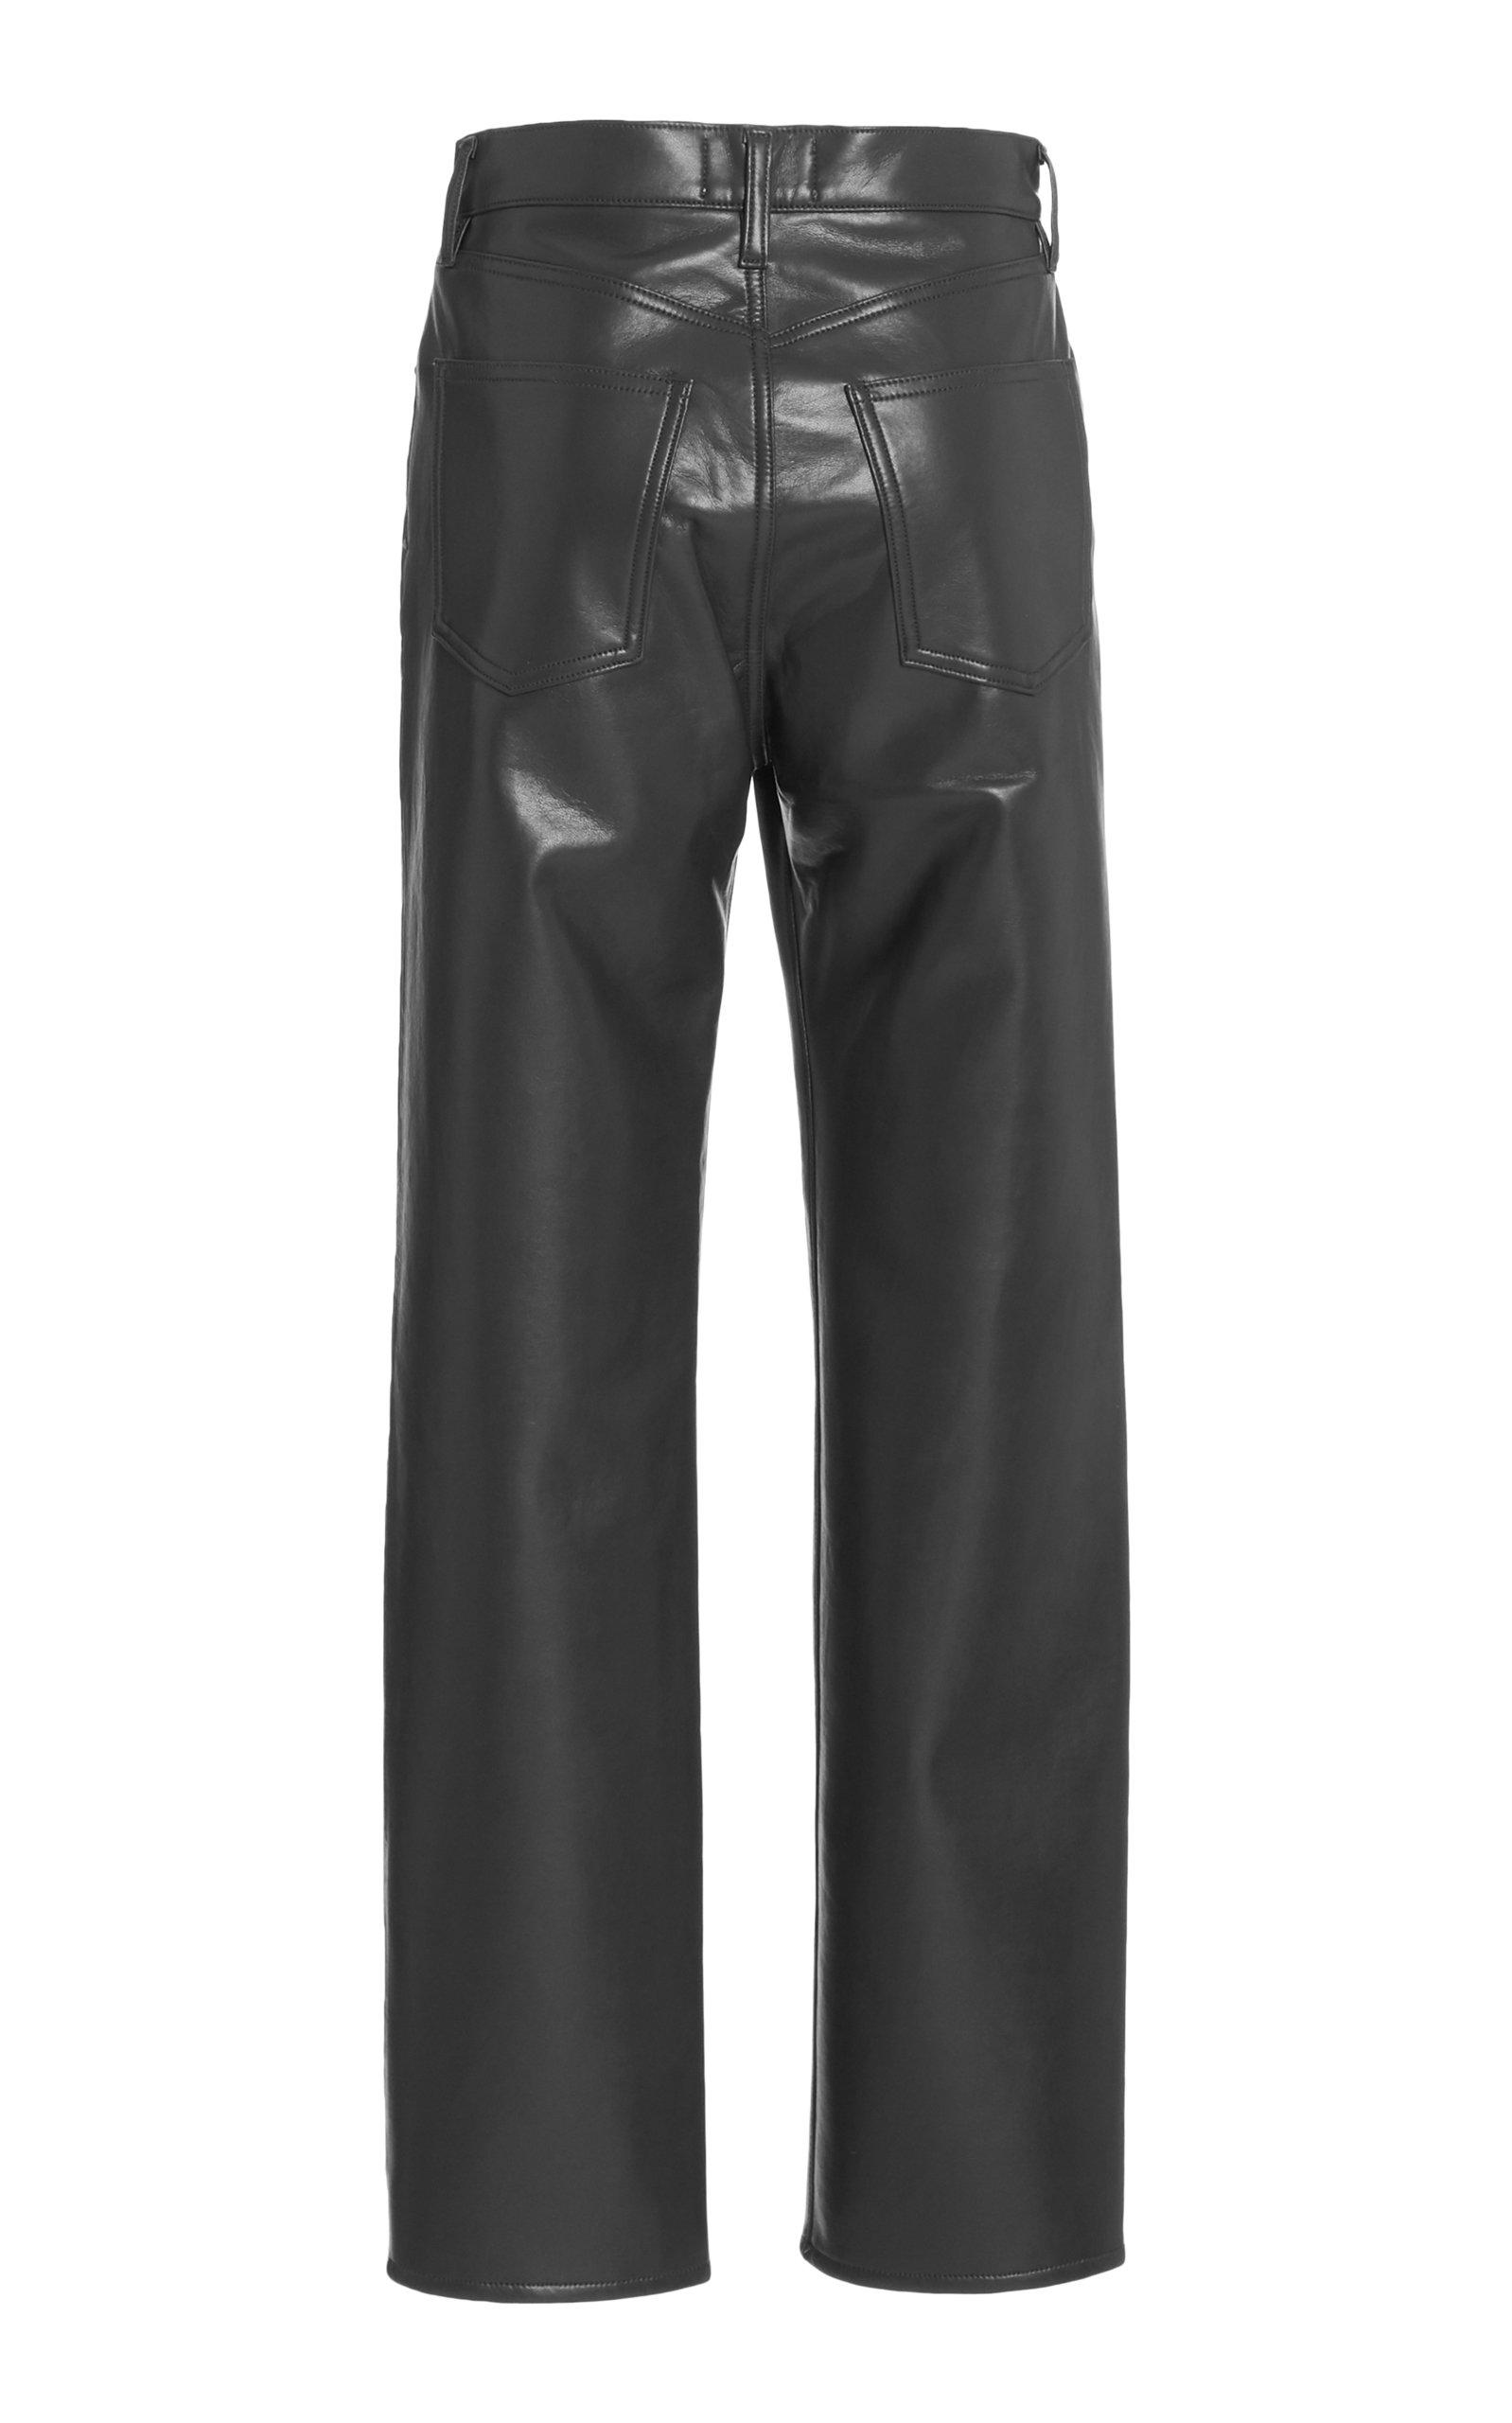 Agolde 90's High-rise Straight-leg Leather Pants in Black - Lyst